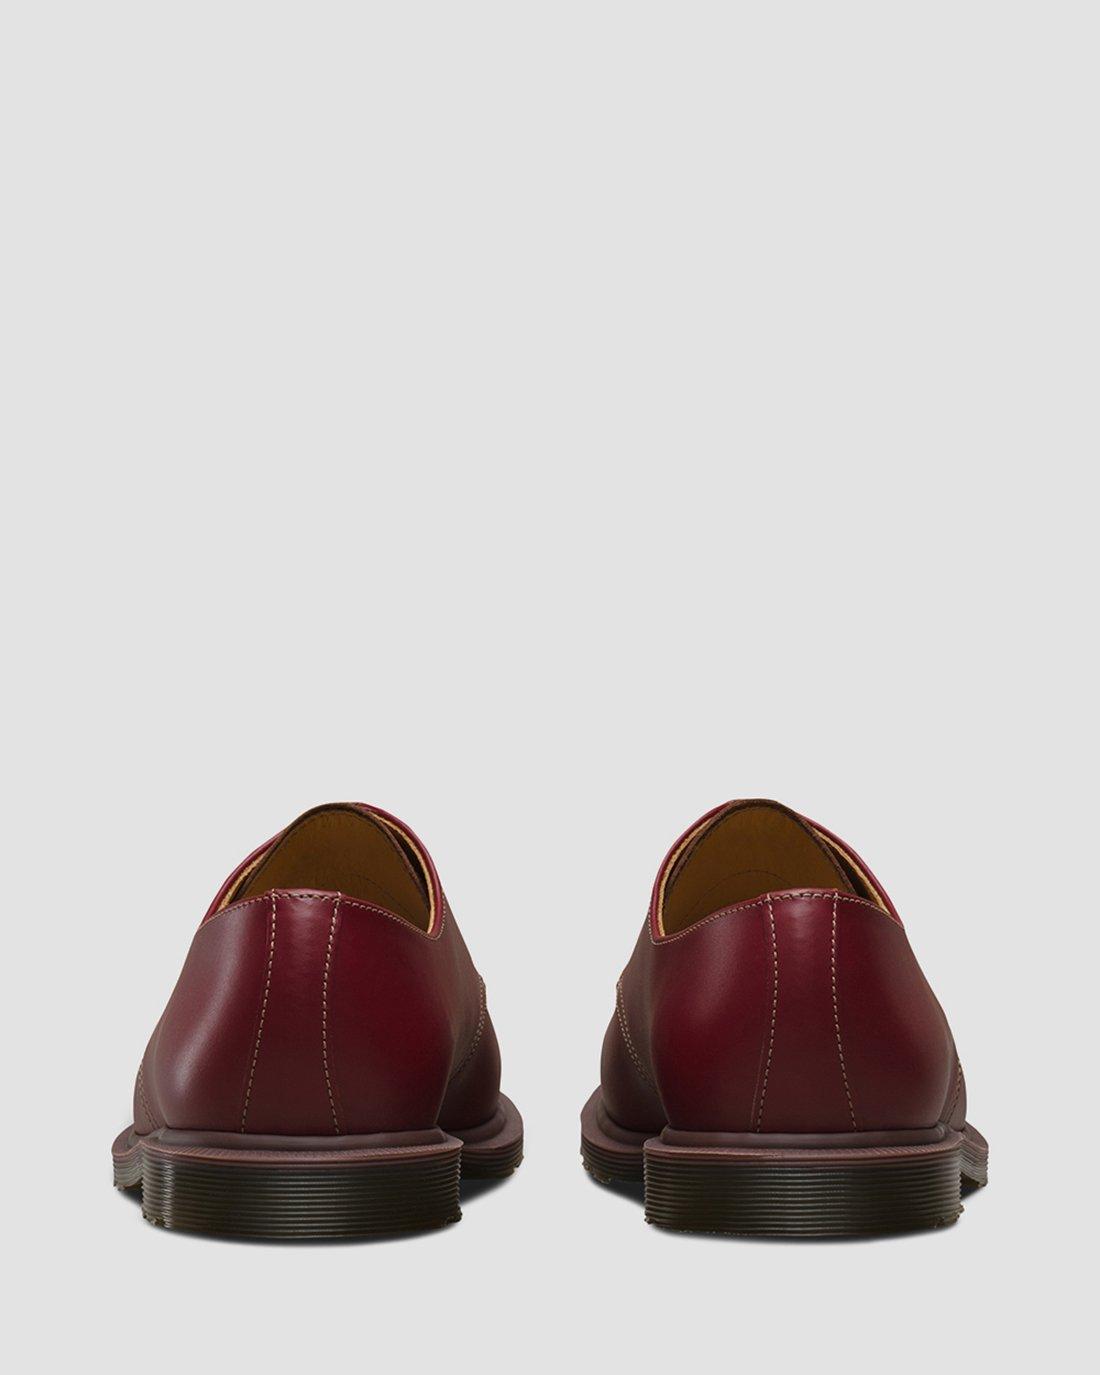 STEED Dr. Martens